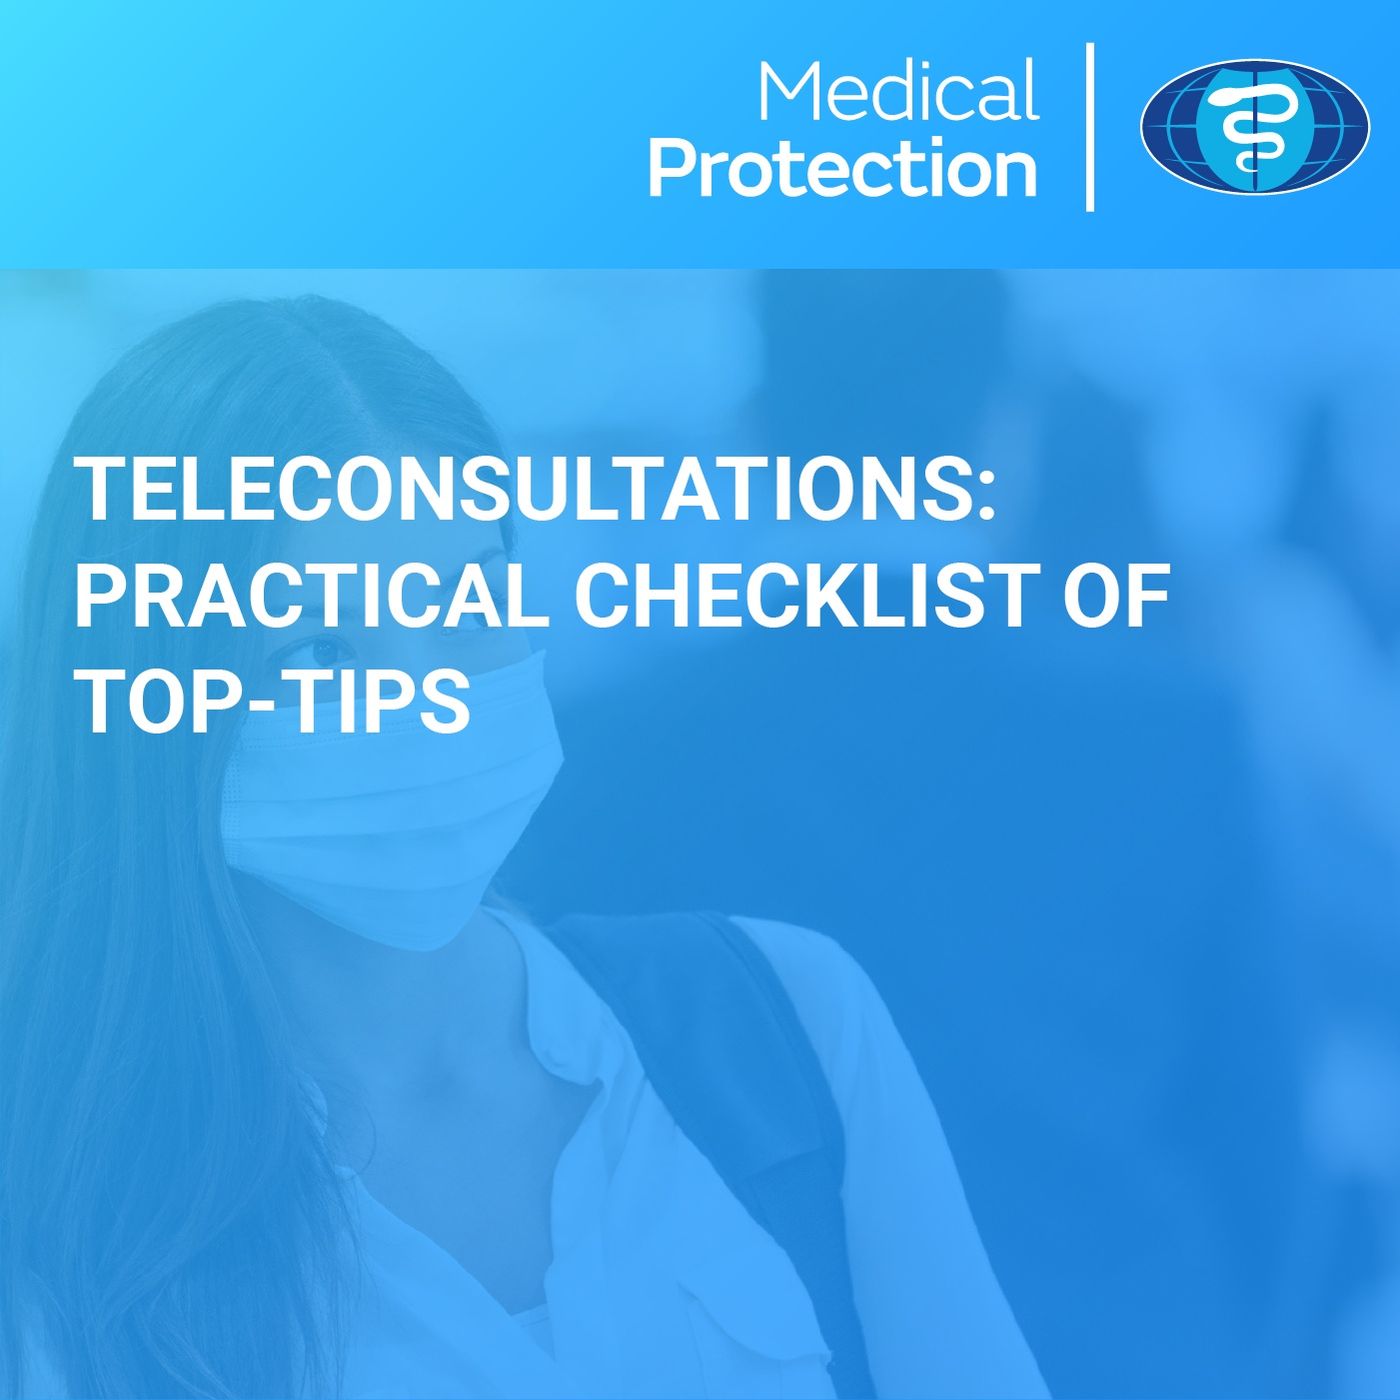 Teleconsultations: Practical Checklist of Top-Tips